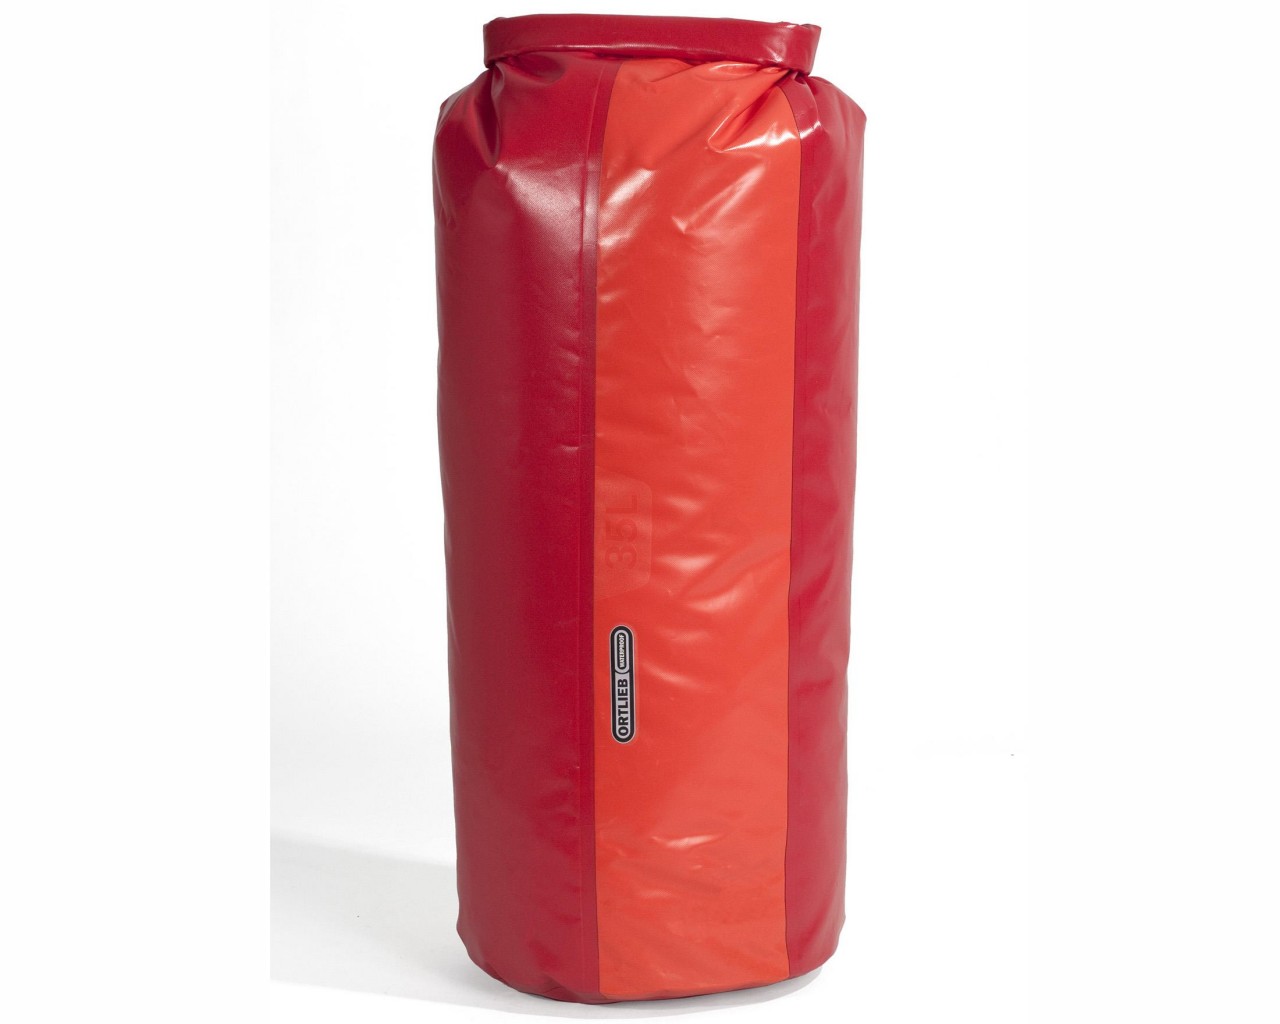 Ortlieb dry bag PD350 - 35 liter | cranberry-signal red